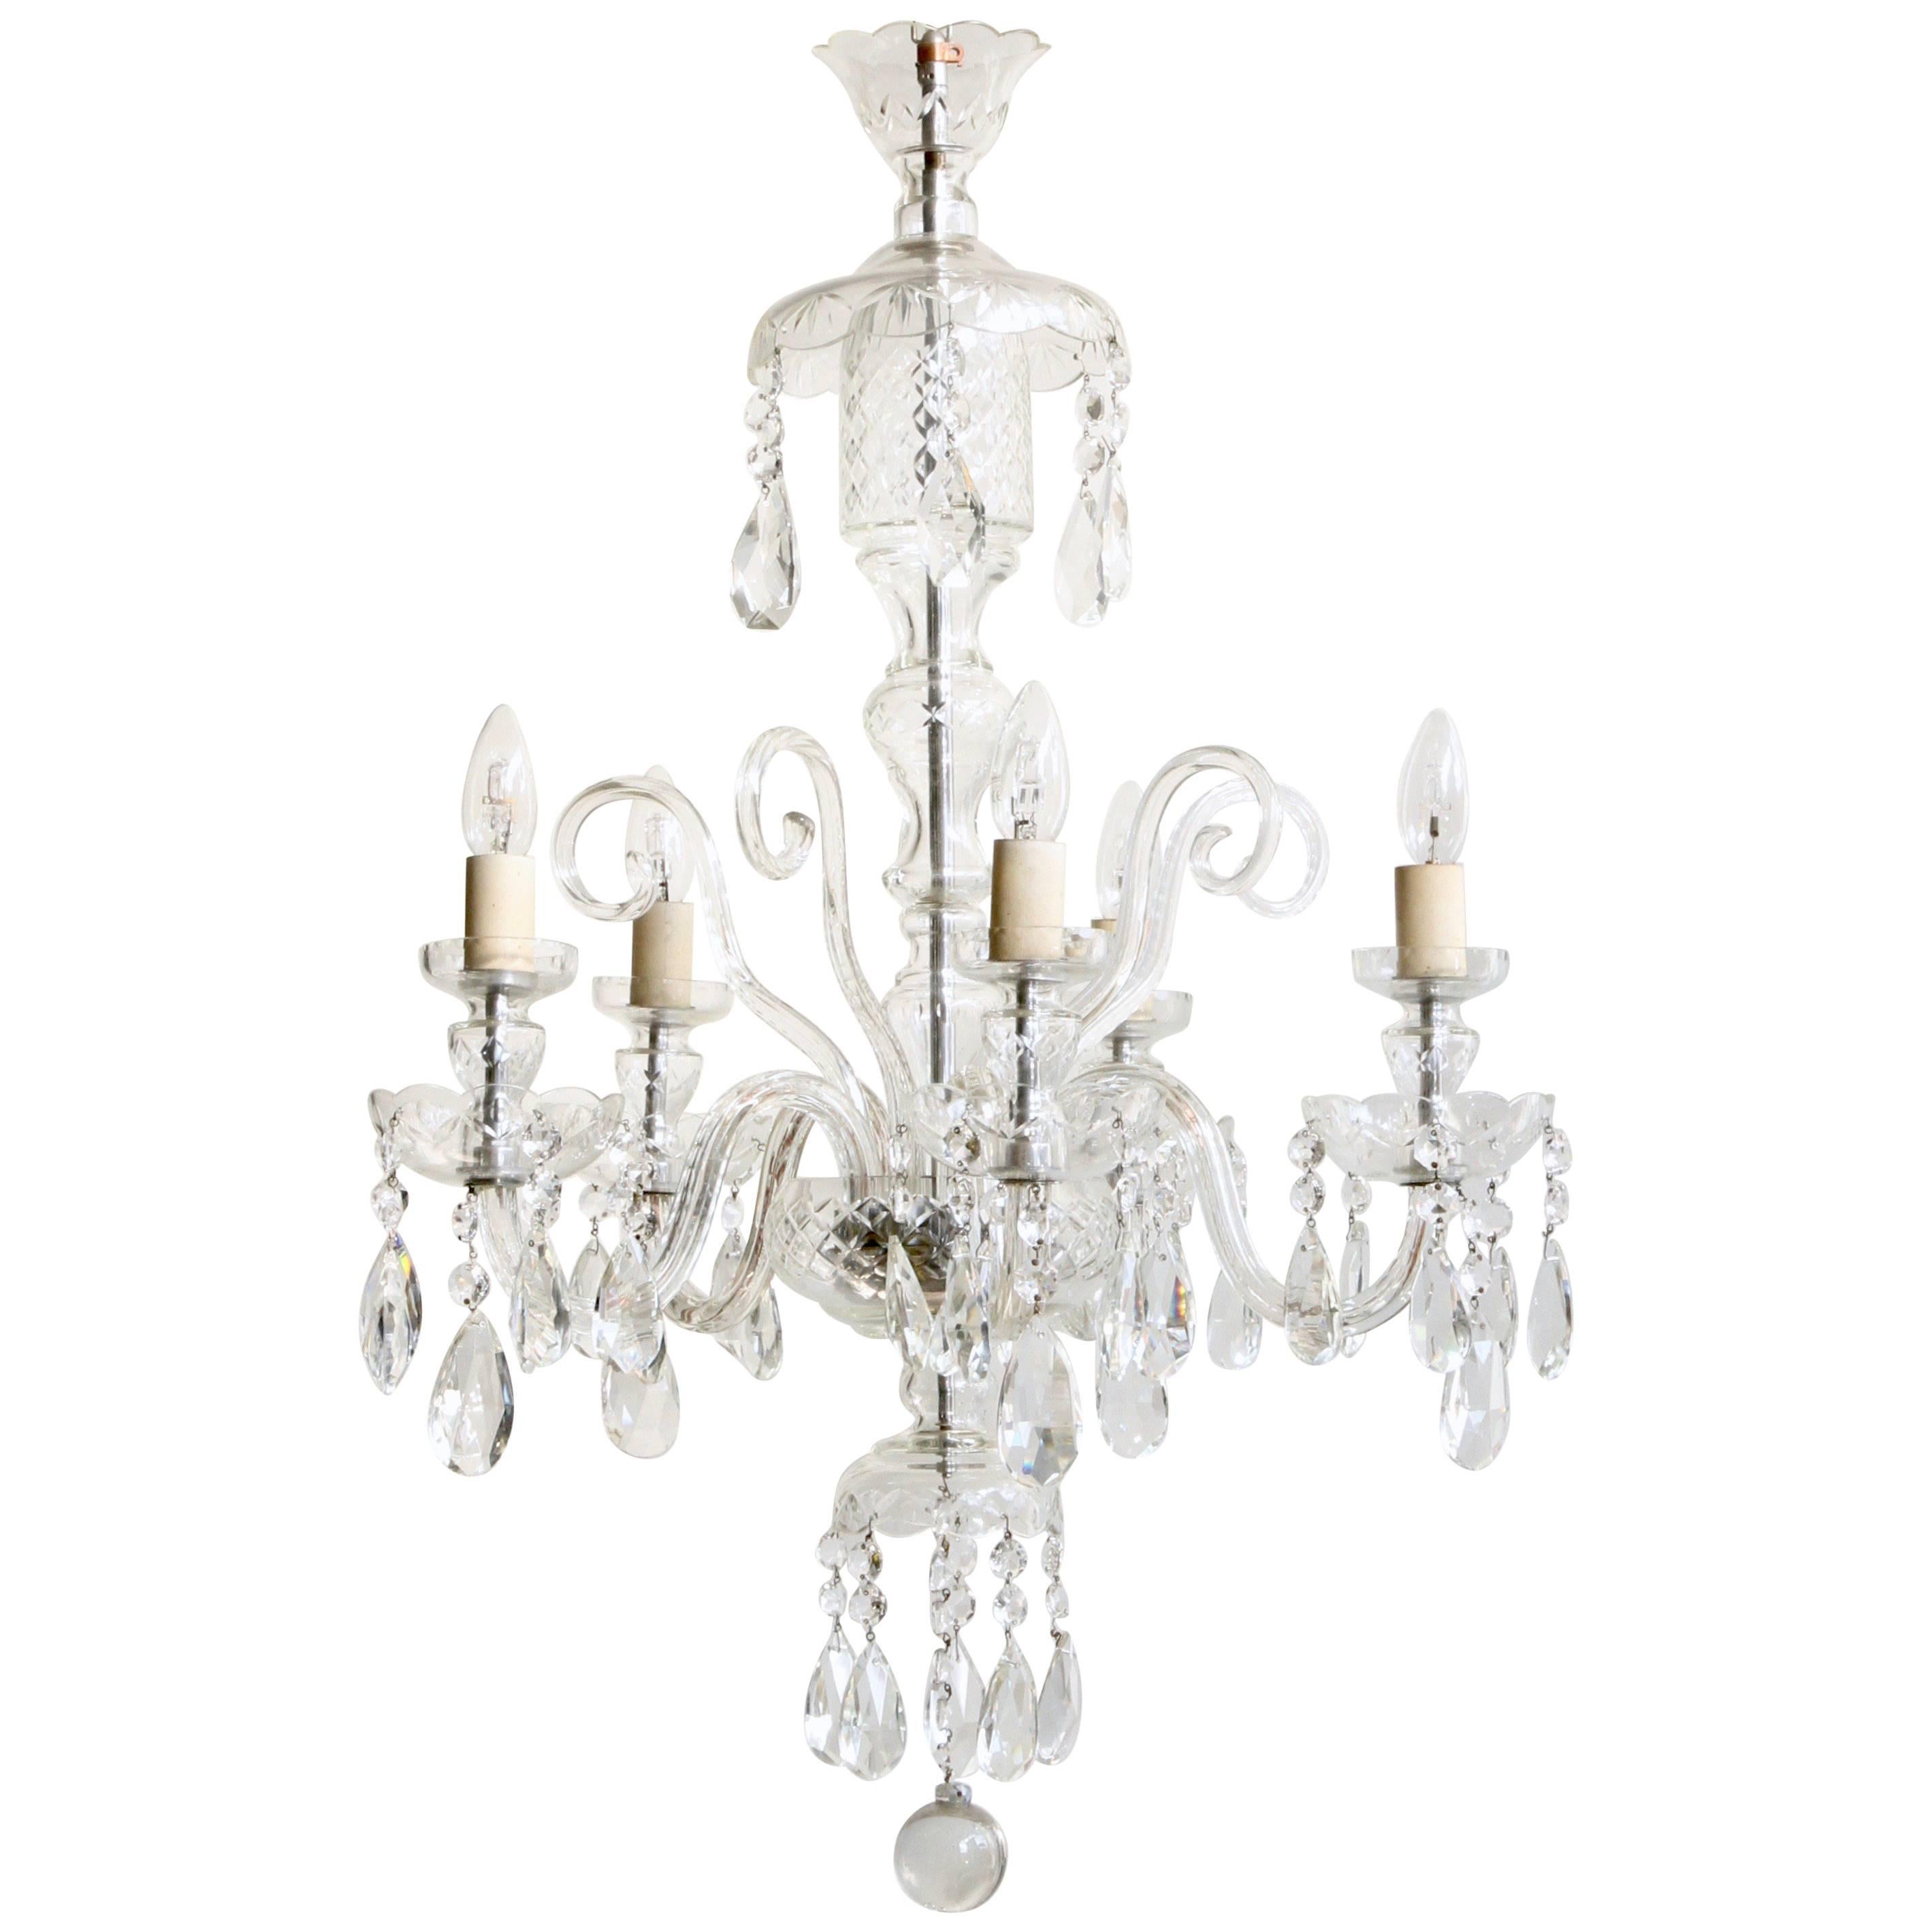 1930s French Large Bohemian Crystal Swan Neck Chandelier with Cut Crystal Drops